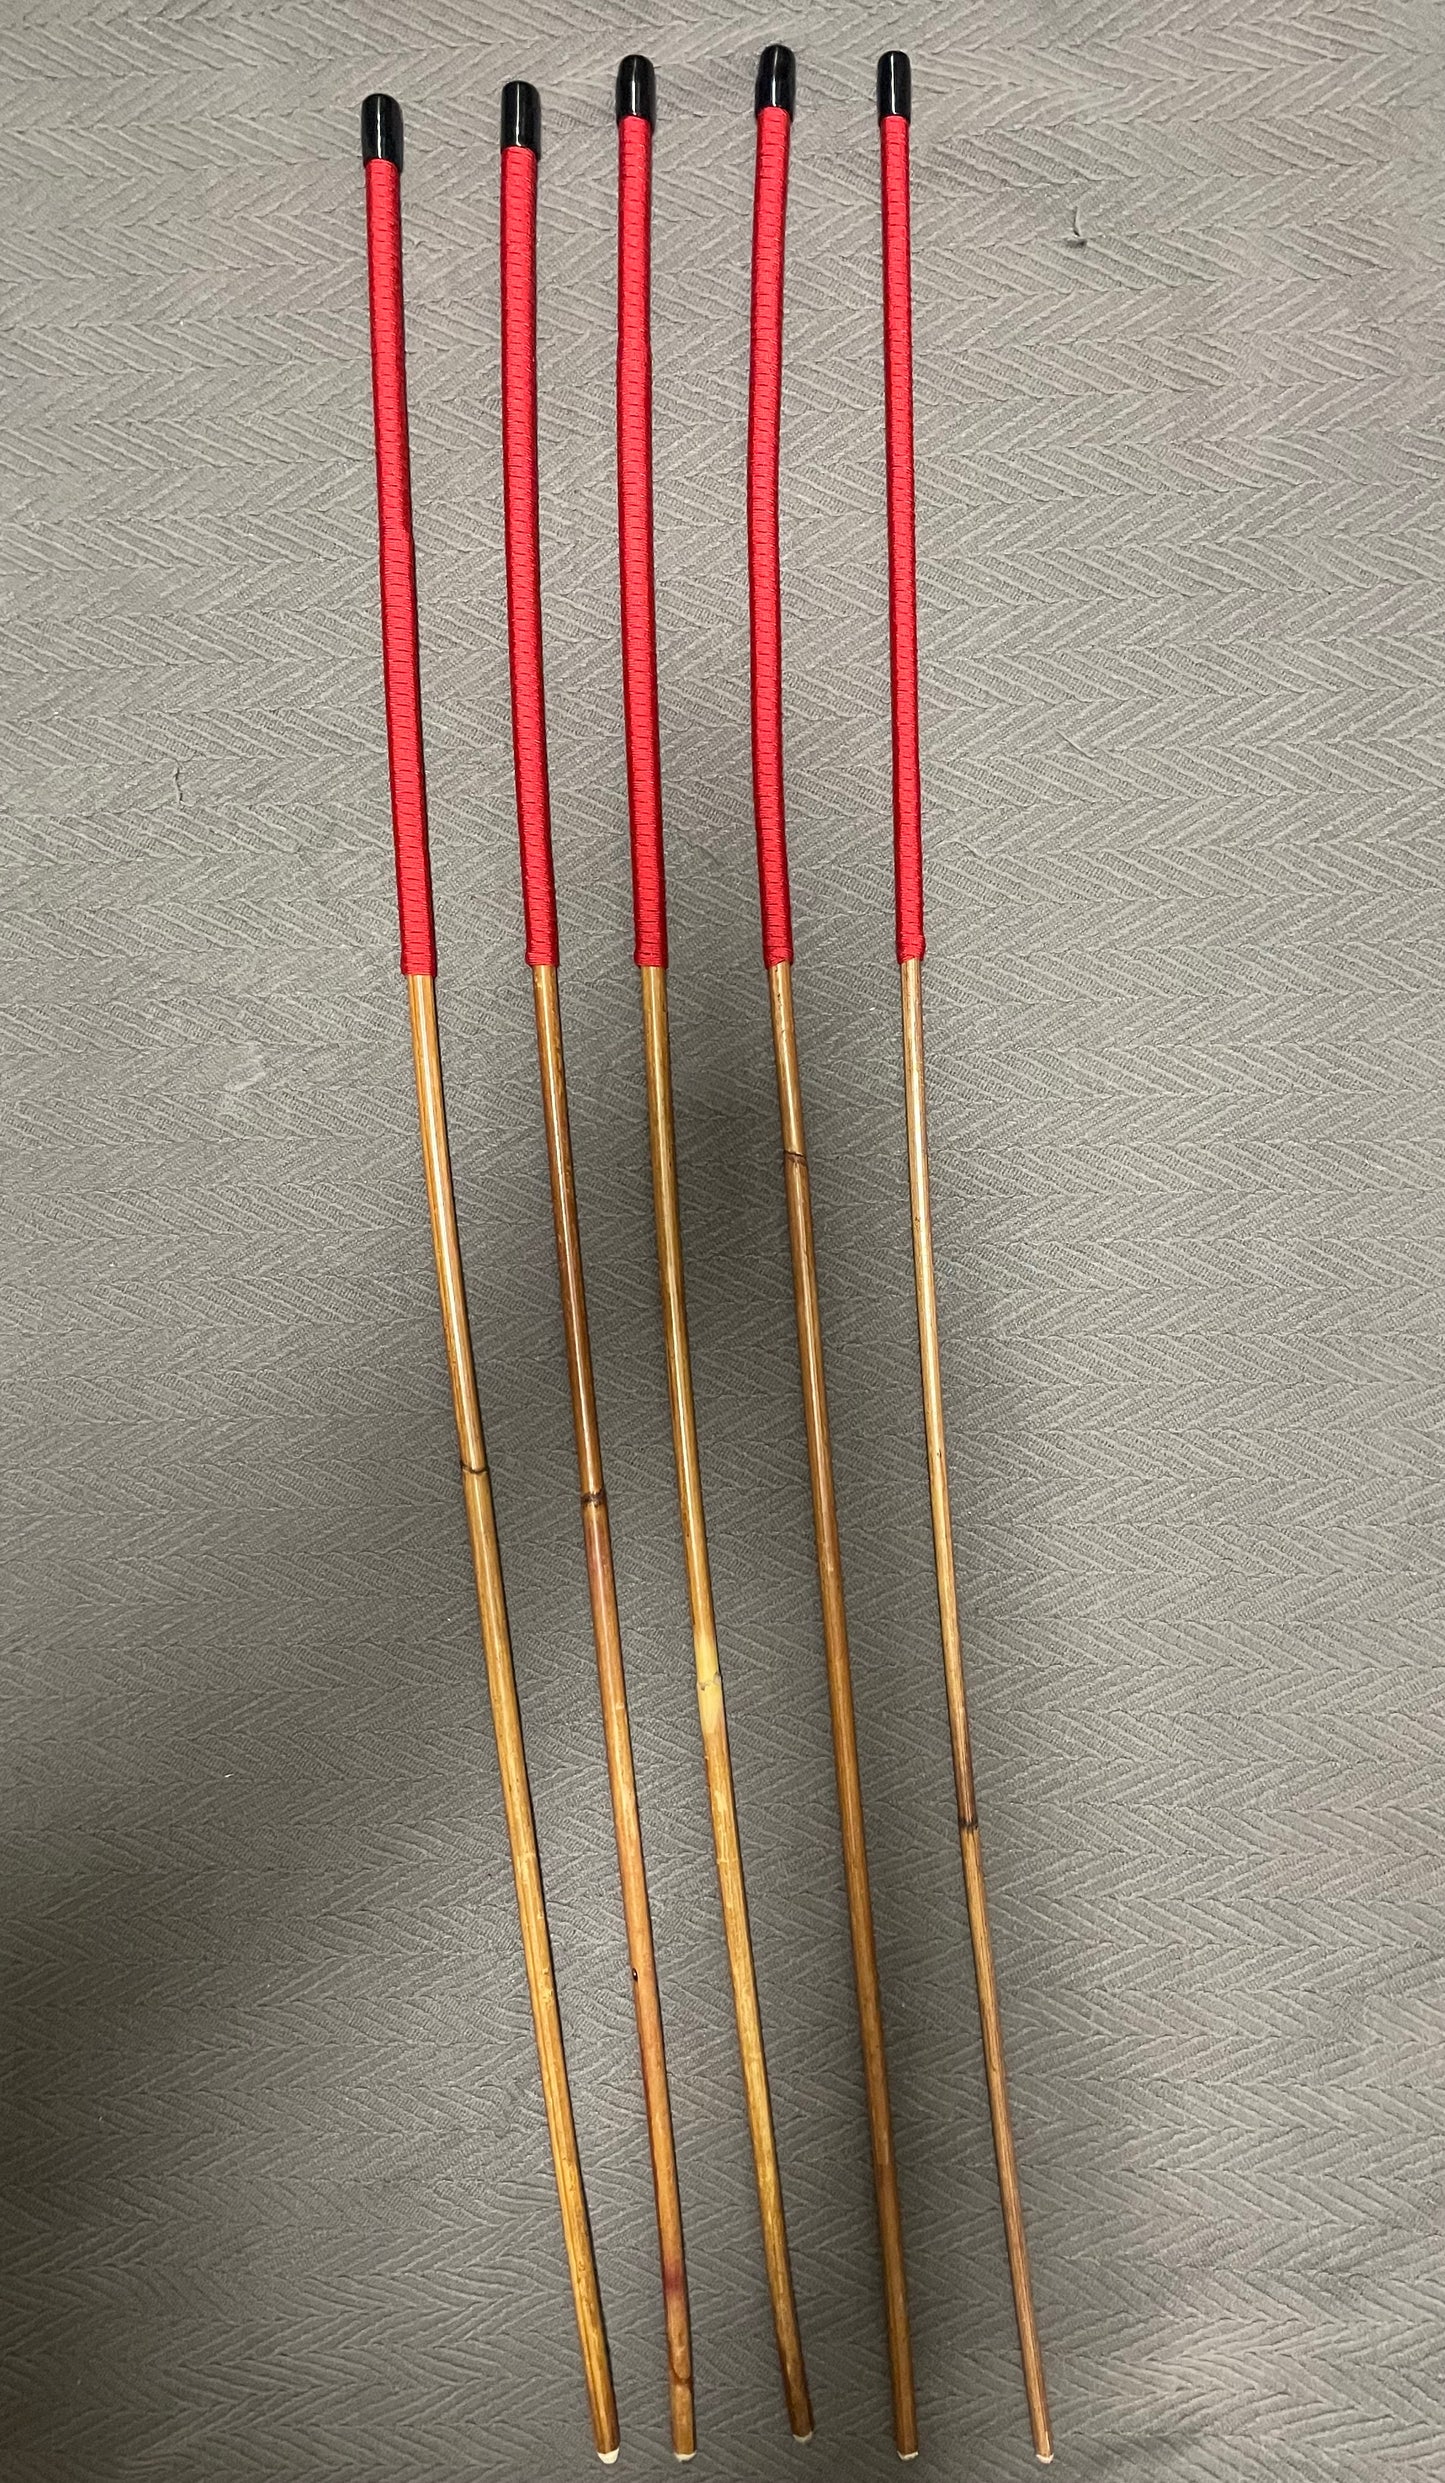 Set of 5 Smoked Dragon Rattan Canes with Imperial Red Paracord Handles - 100 cms Length - 7 - 11.5 mm Diameters - Englishvice Canes